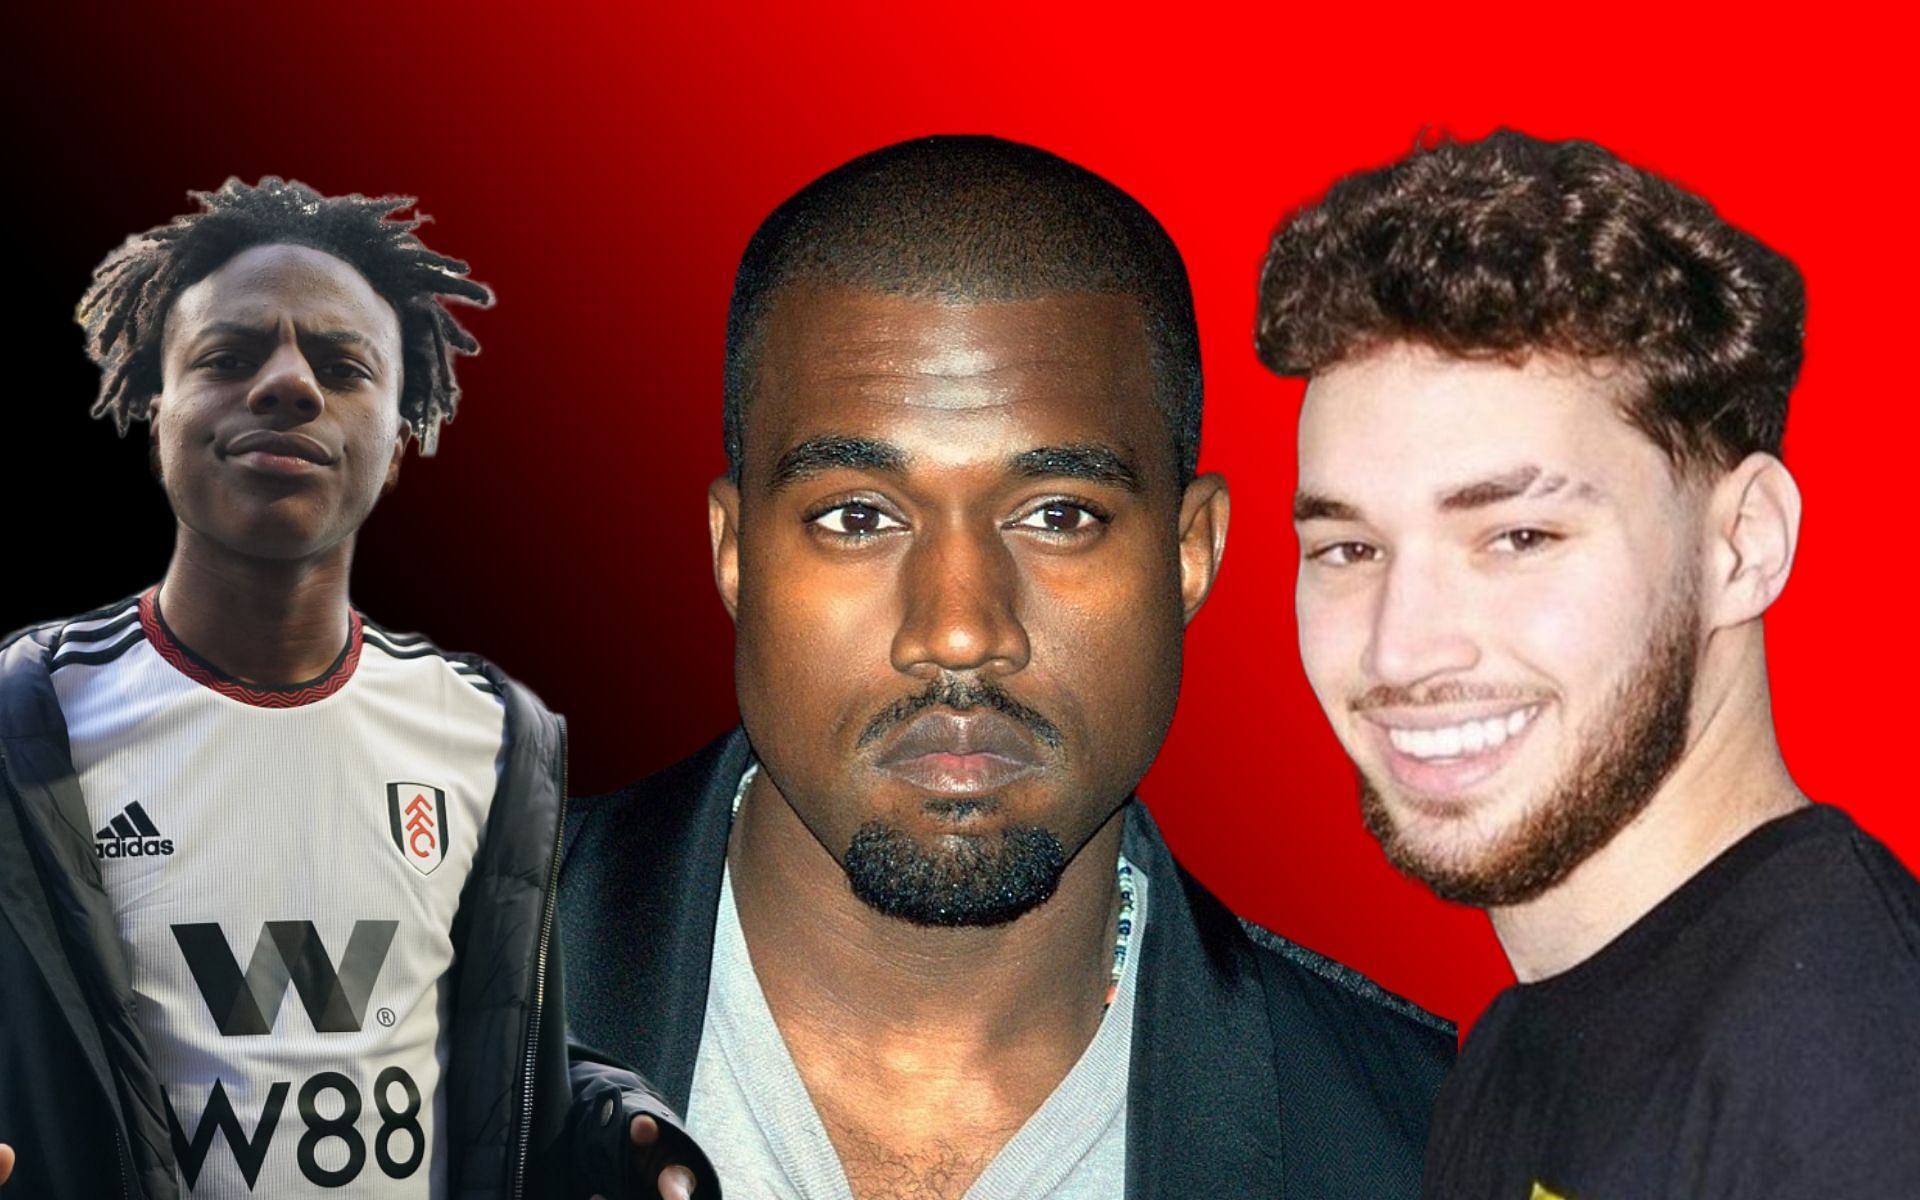 Avengers of controversial figures coming together - Fans react to Adin  Ross and IShowSpeed trying to meet Kanye West on livestream